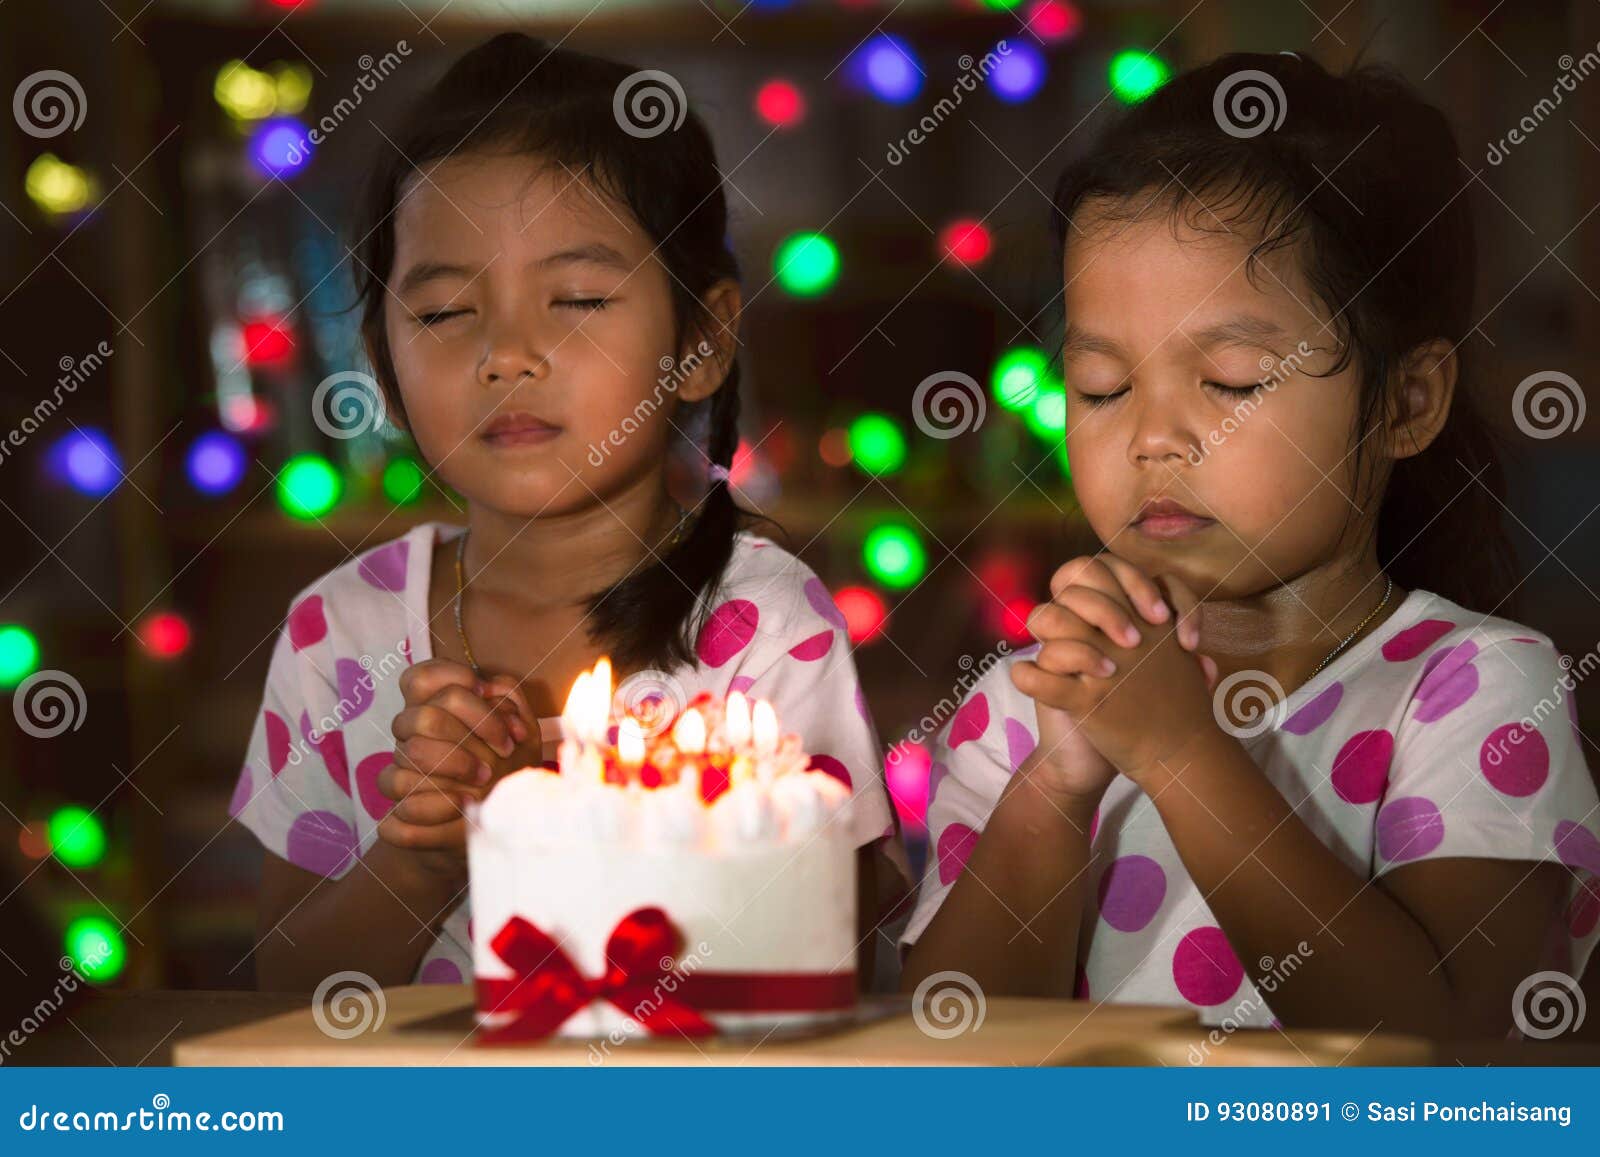 little girls make folded hand to wish the good things for their birthday